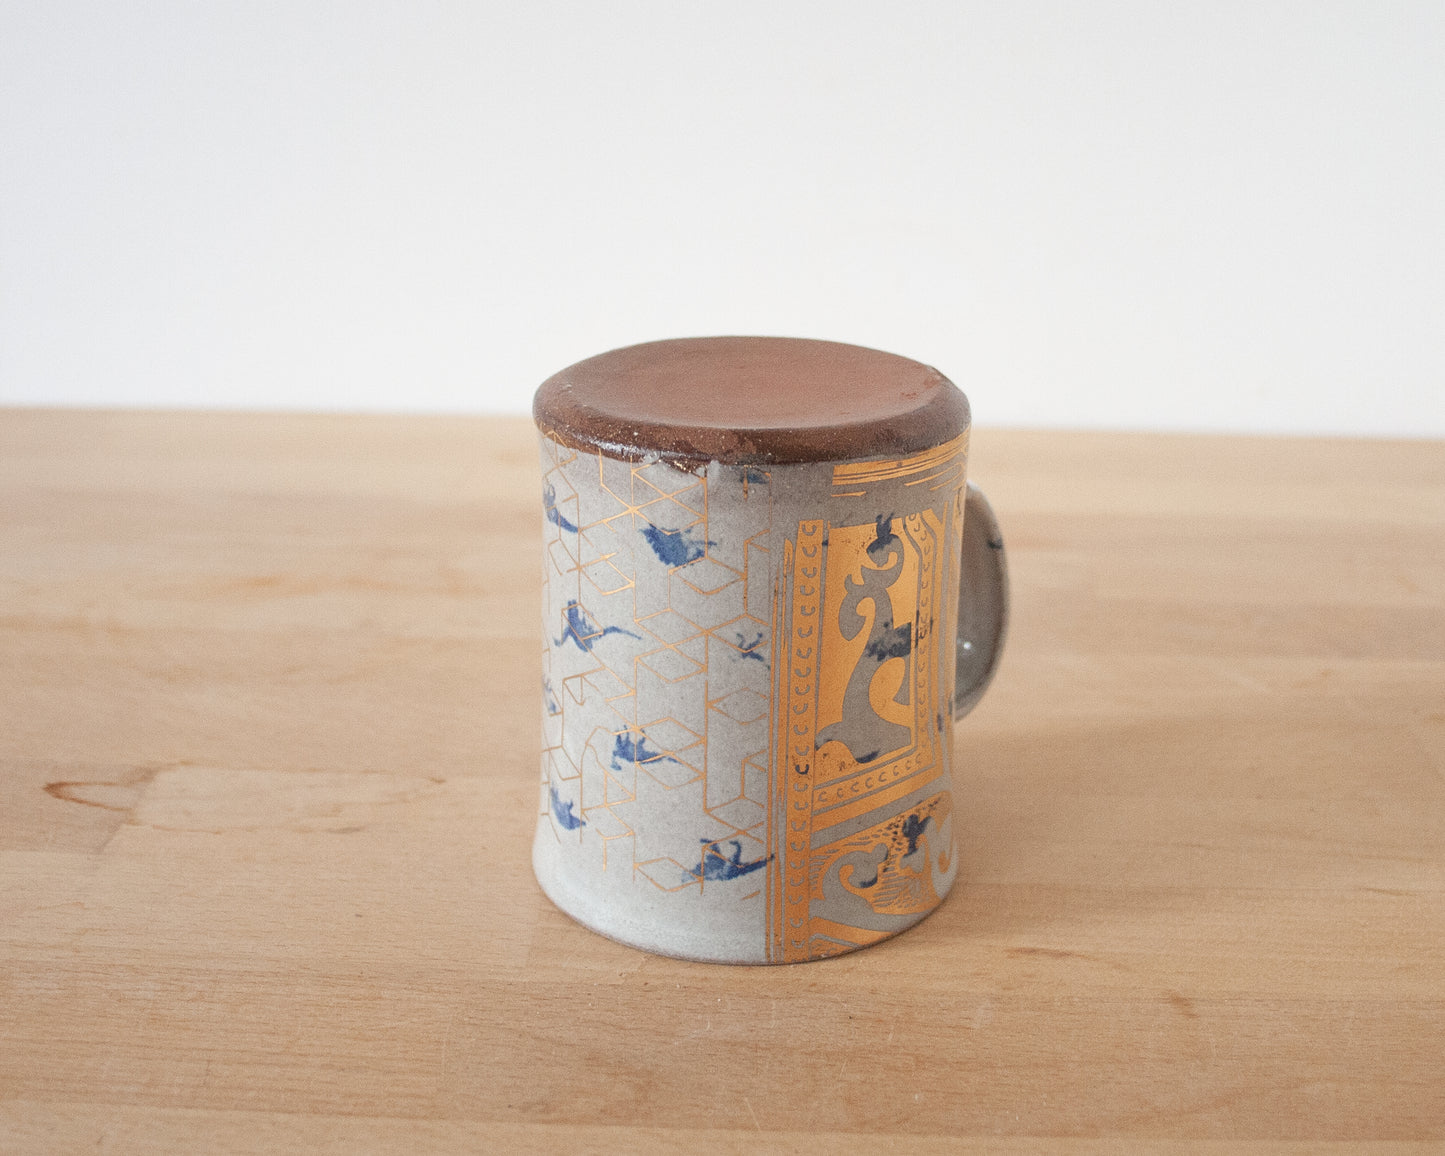 Gold T-Rex Mug with small blue dinos